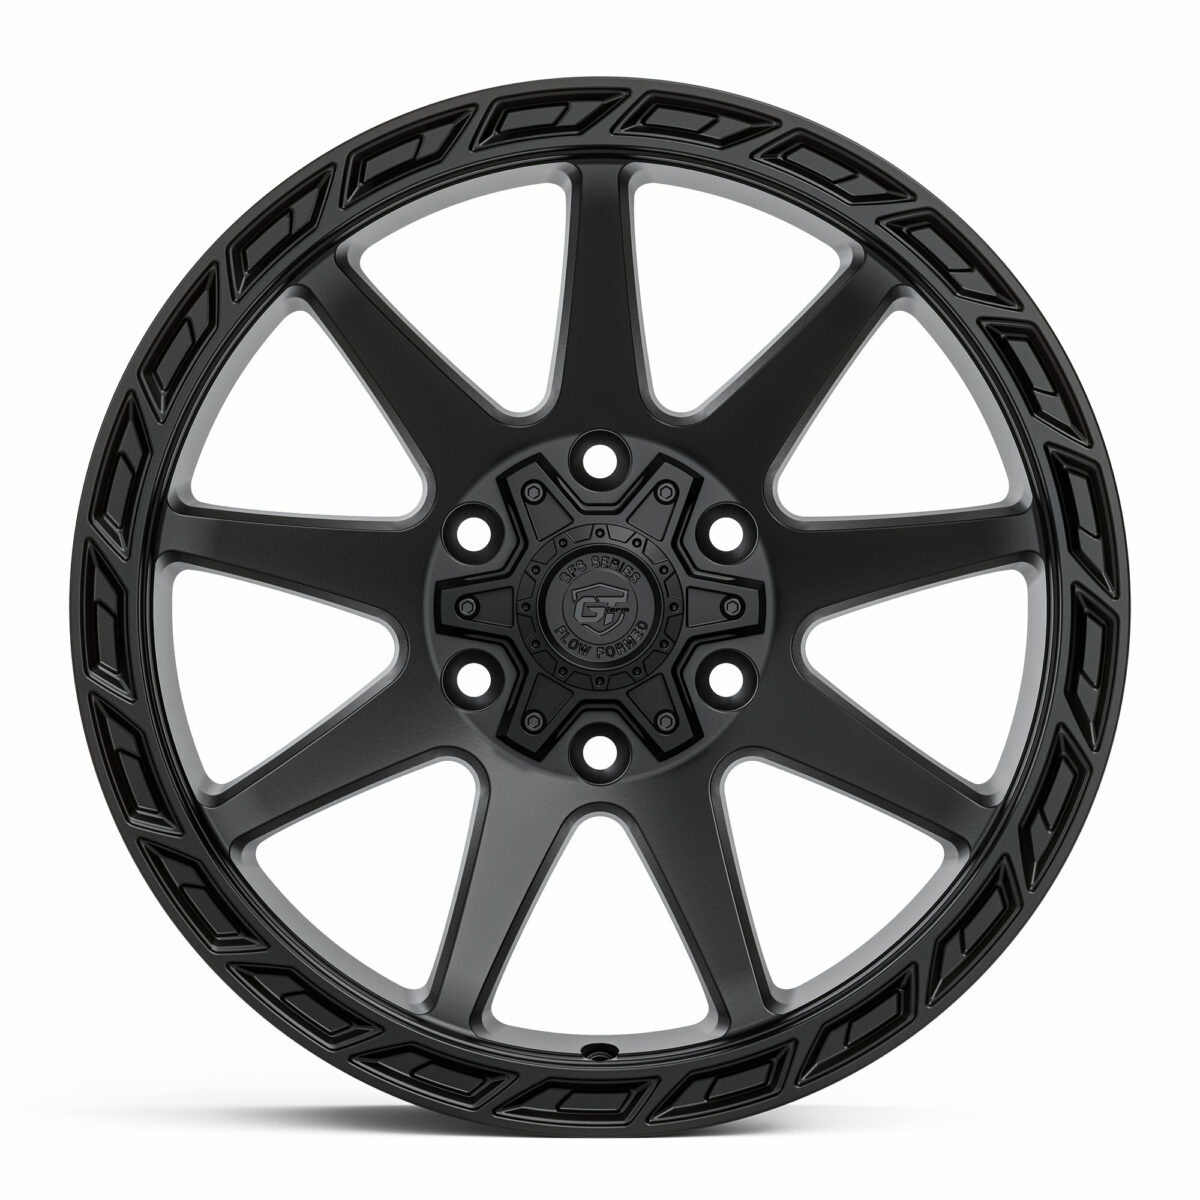 4X4 WHEELS GT FORM GFS5 SATIN BLACK 18 20 INCH OFFROAD RIMS FOR 4WD SUV